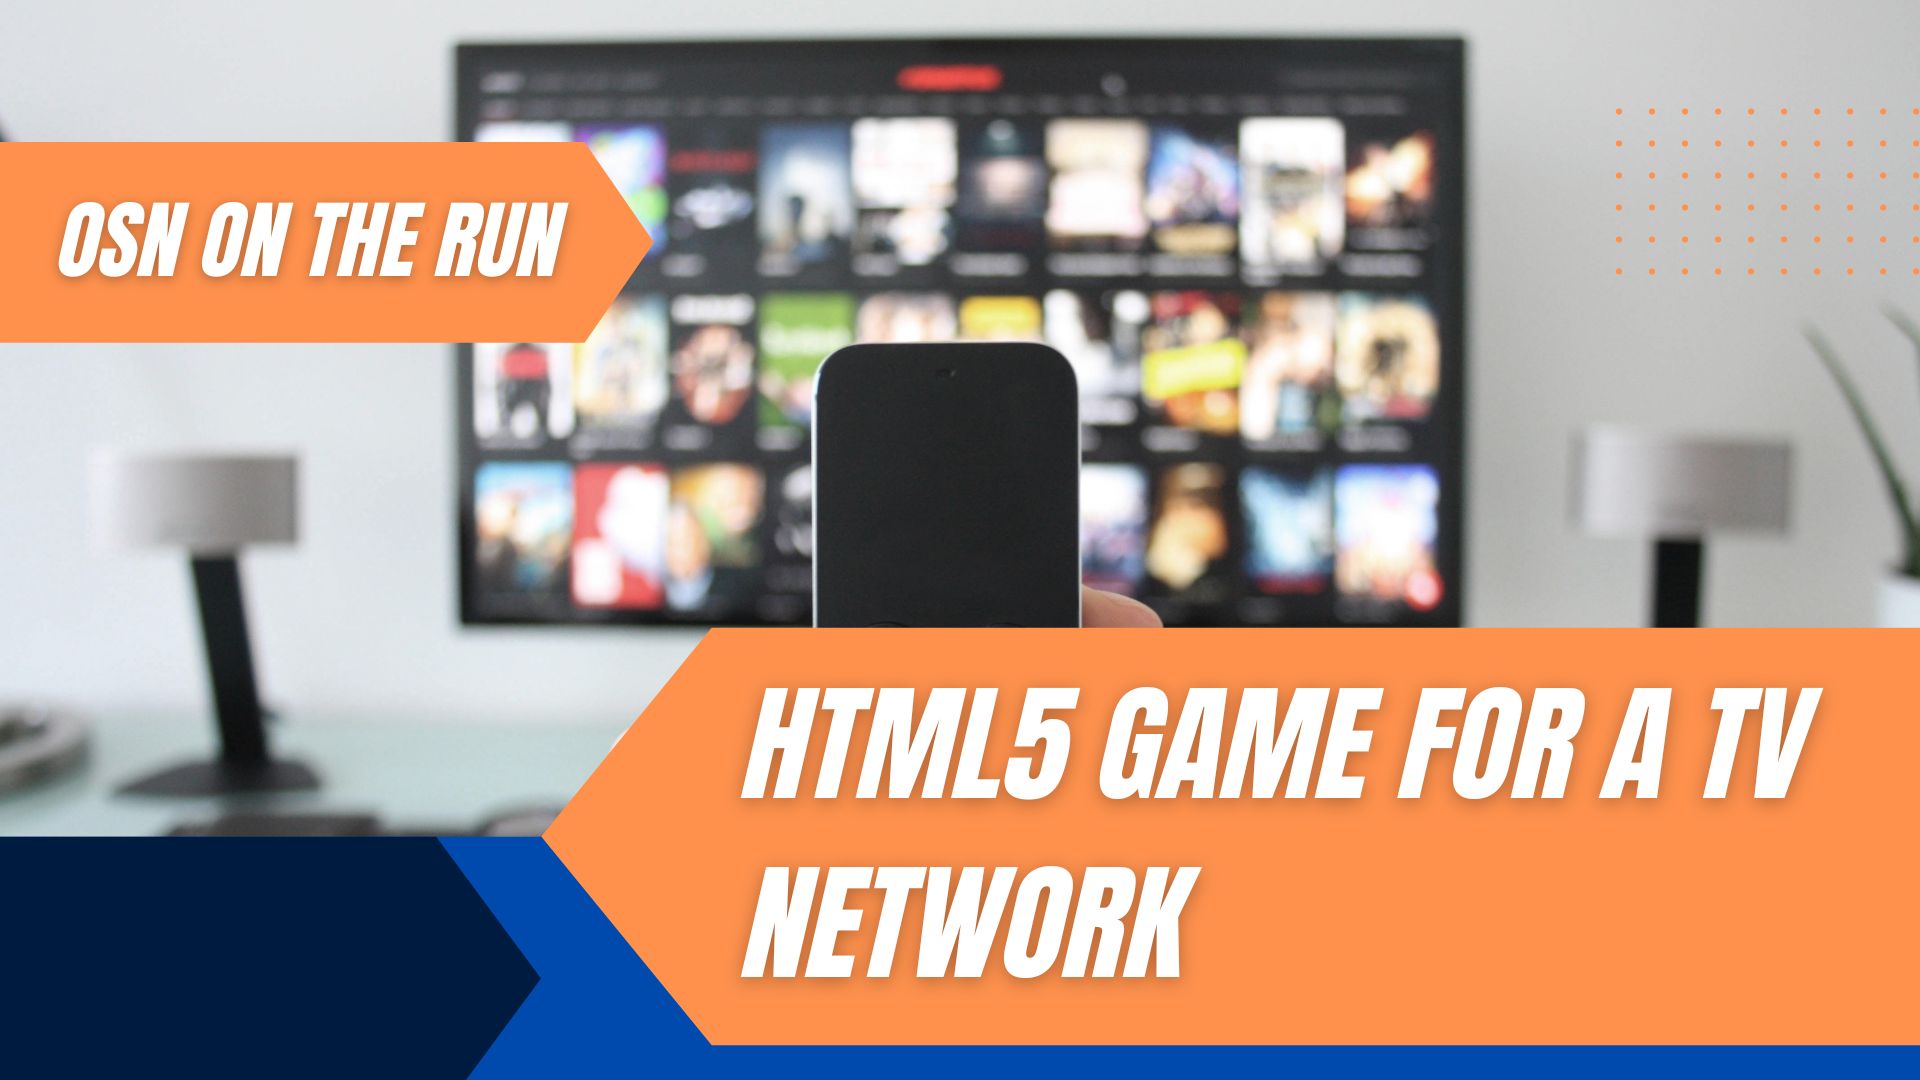 OSN On The Run - HTML5 Game for a TV Network